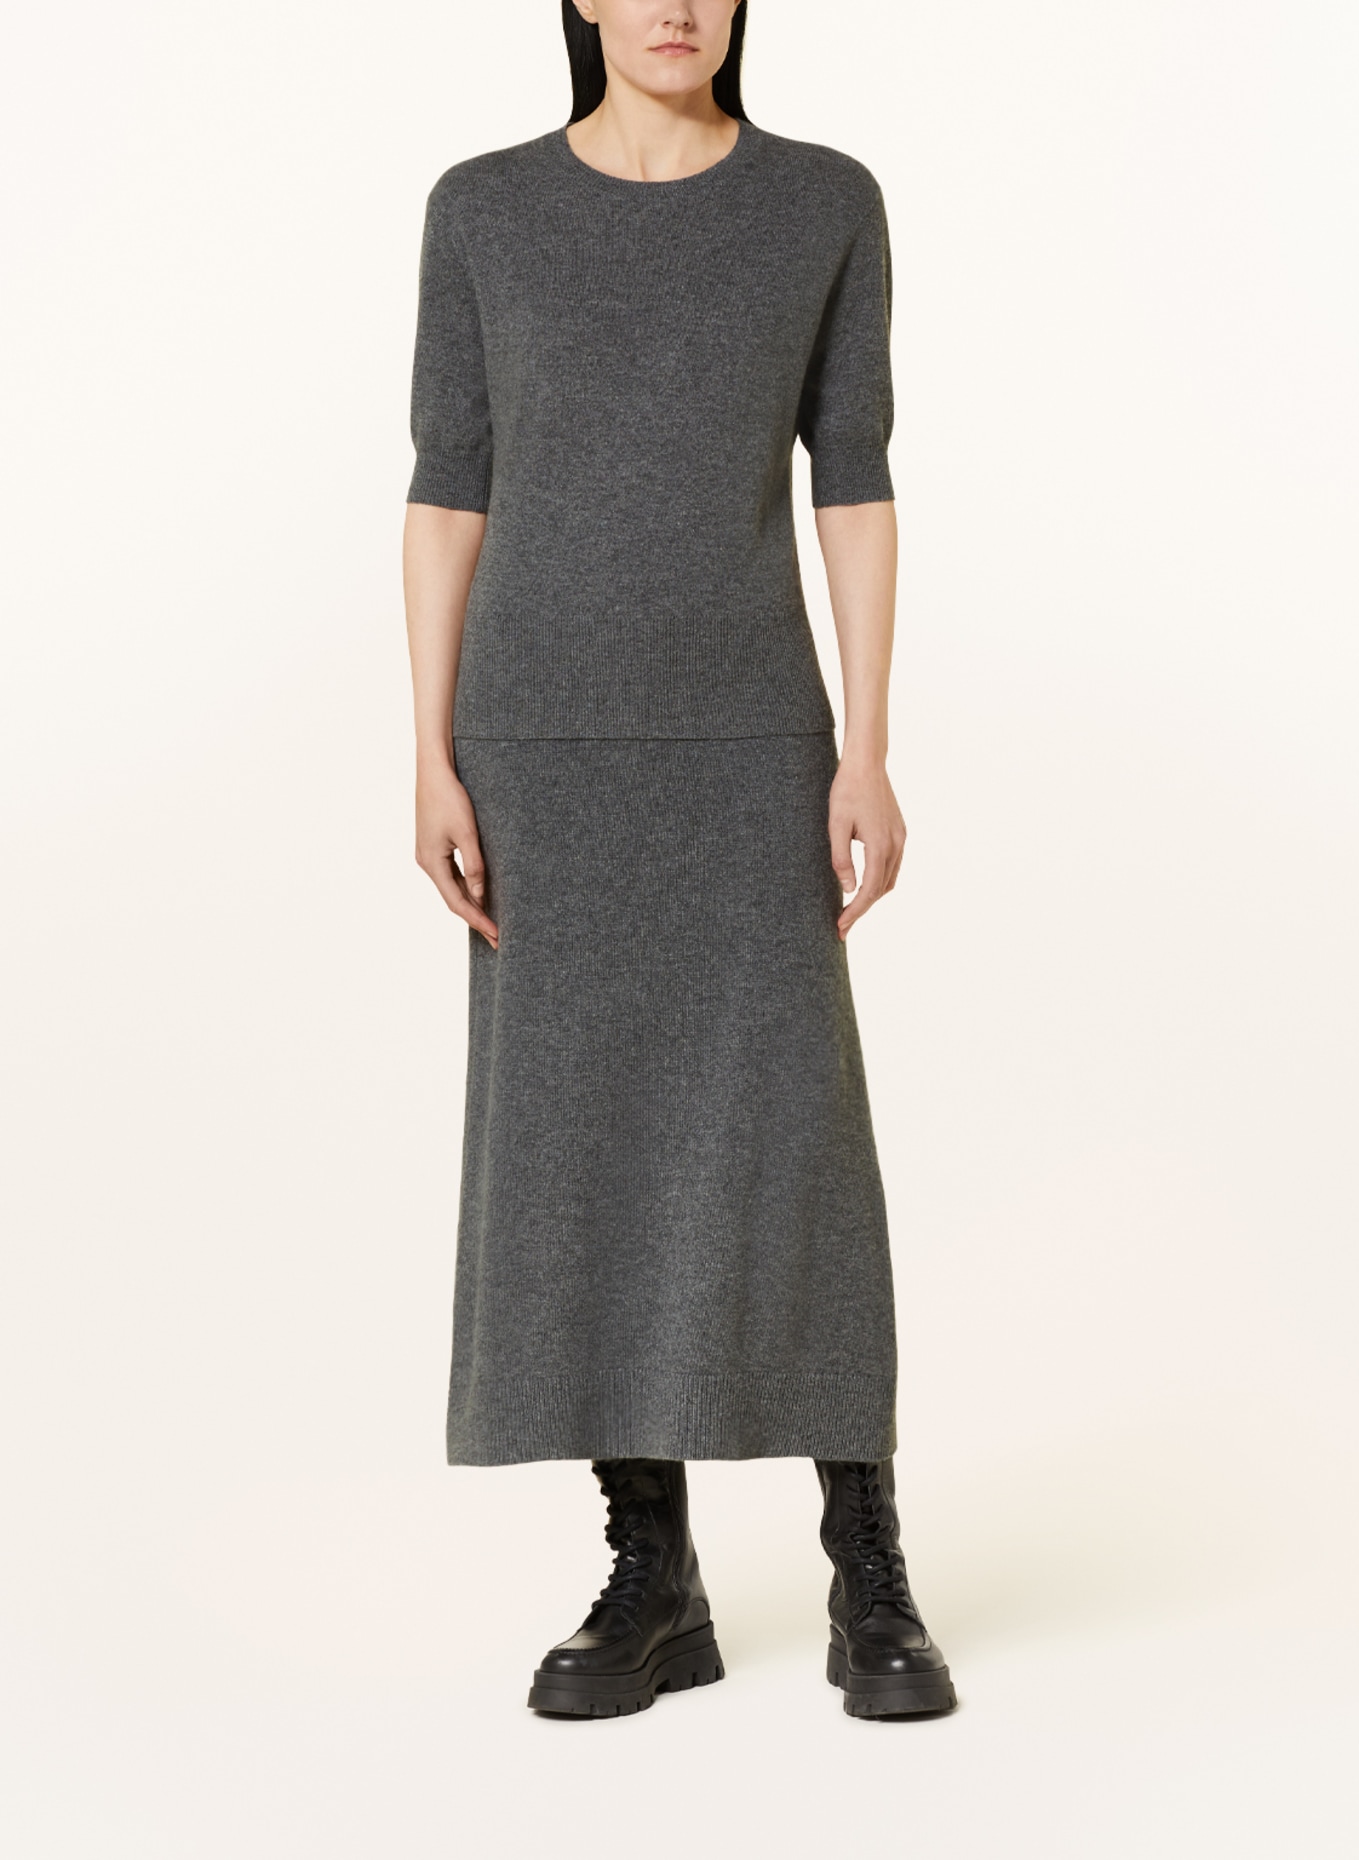 SMINFINITY Knit skirt in cashmere, Color: DARK GRAY (Image 2)